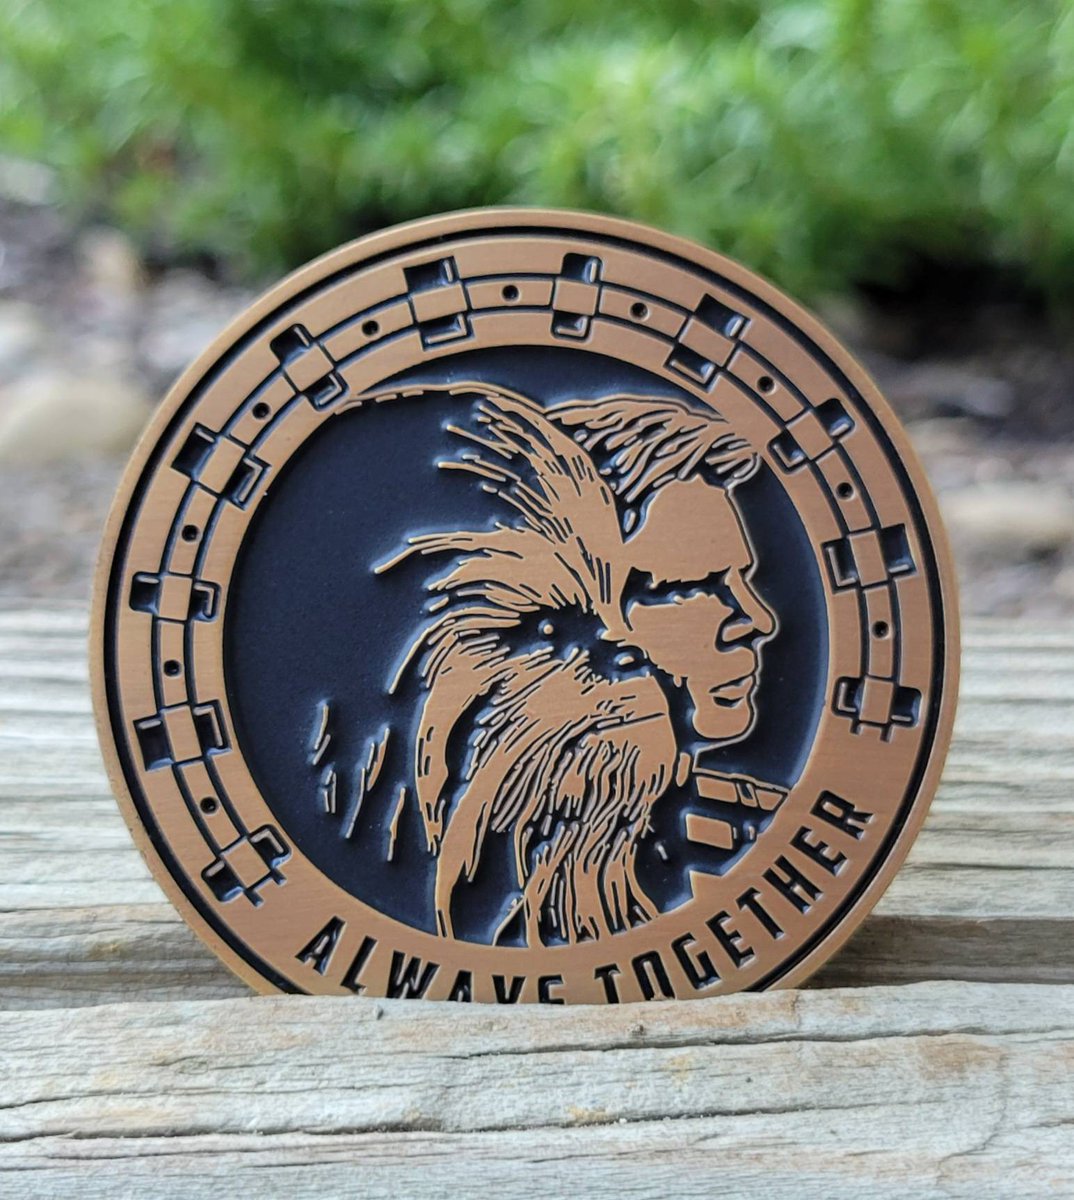 10th Anniversary medallion from the Peter Mayhew Foundation arrived. #StarWars #PeterMayhewFoundation #charity #alwaystogether https://t.co/anGOxgXMb2